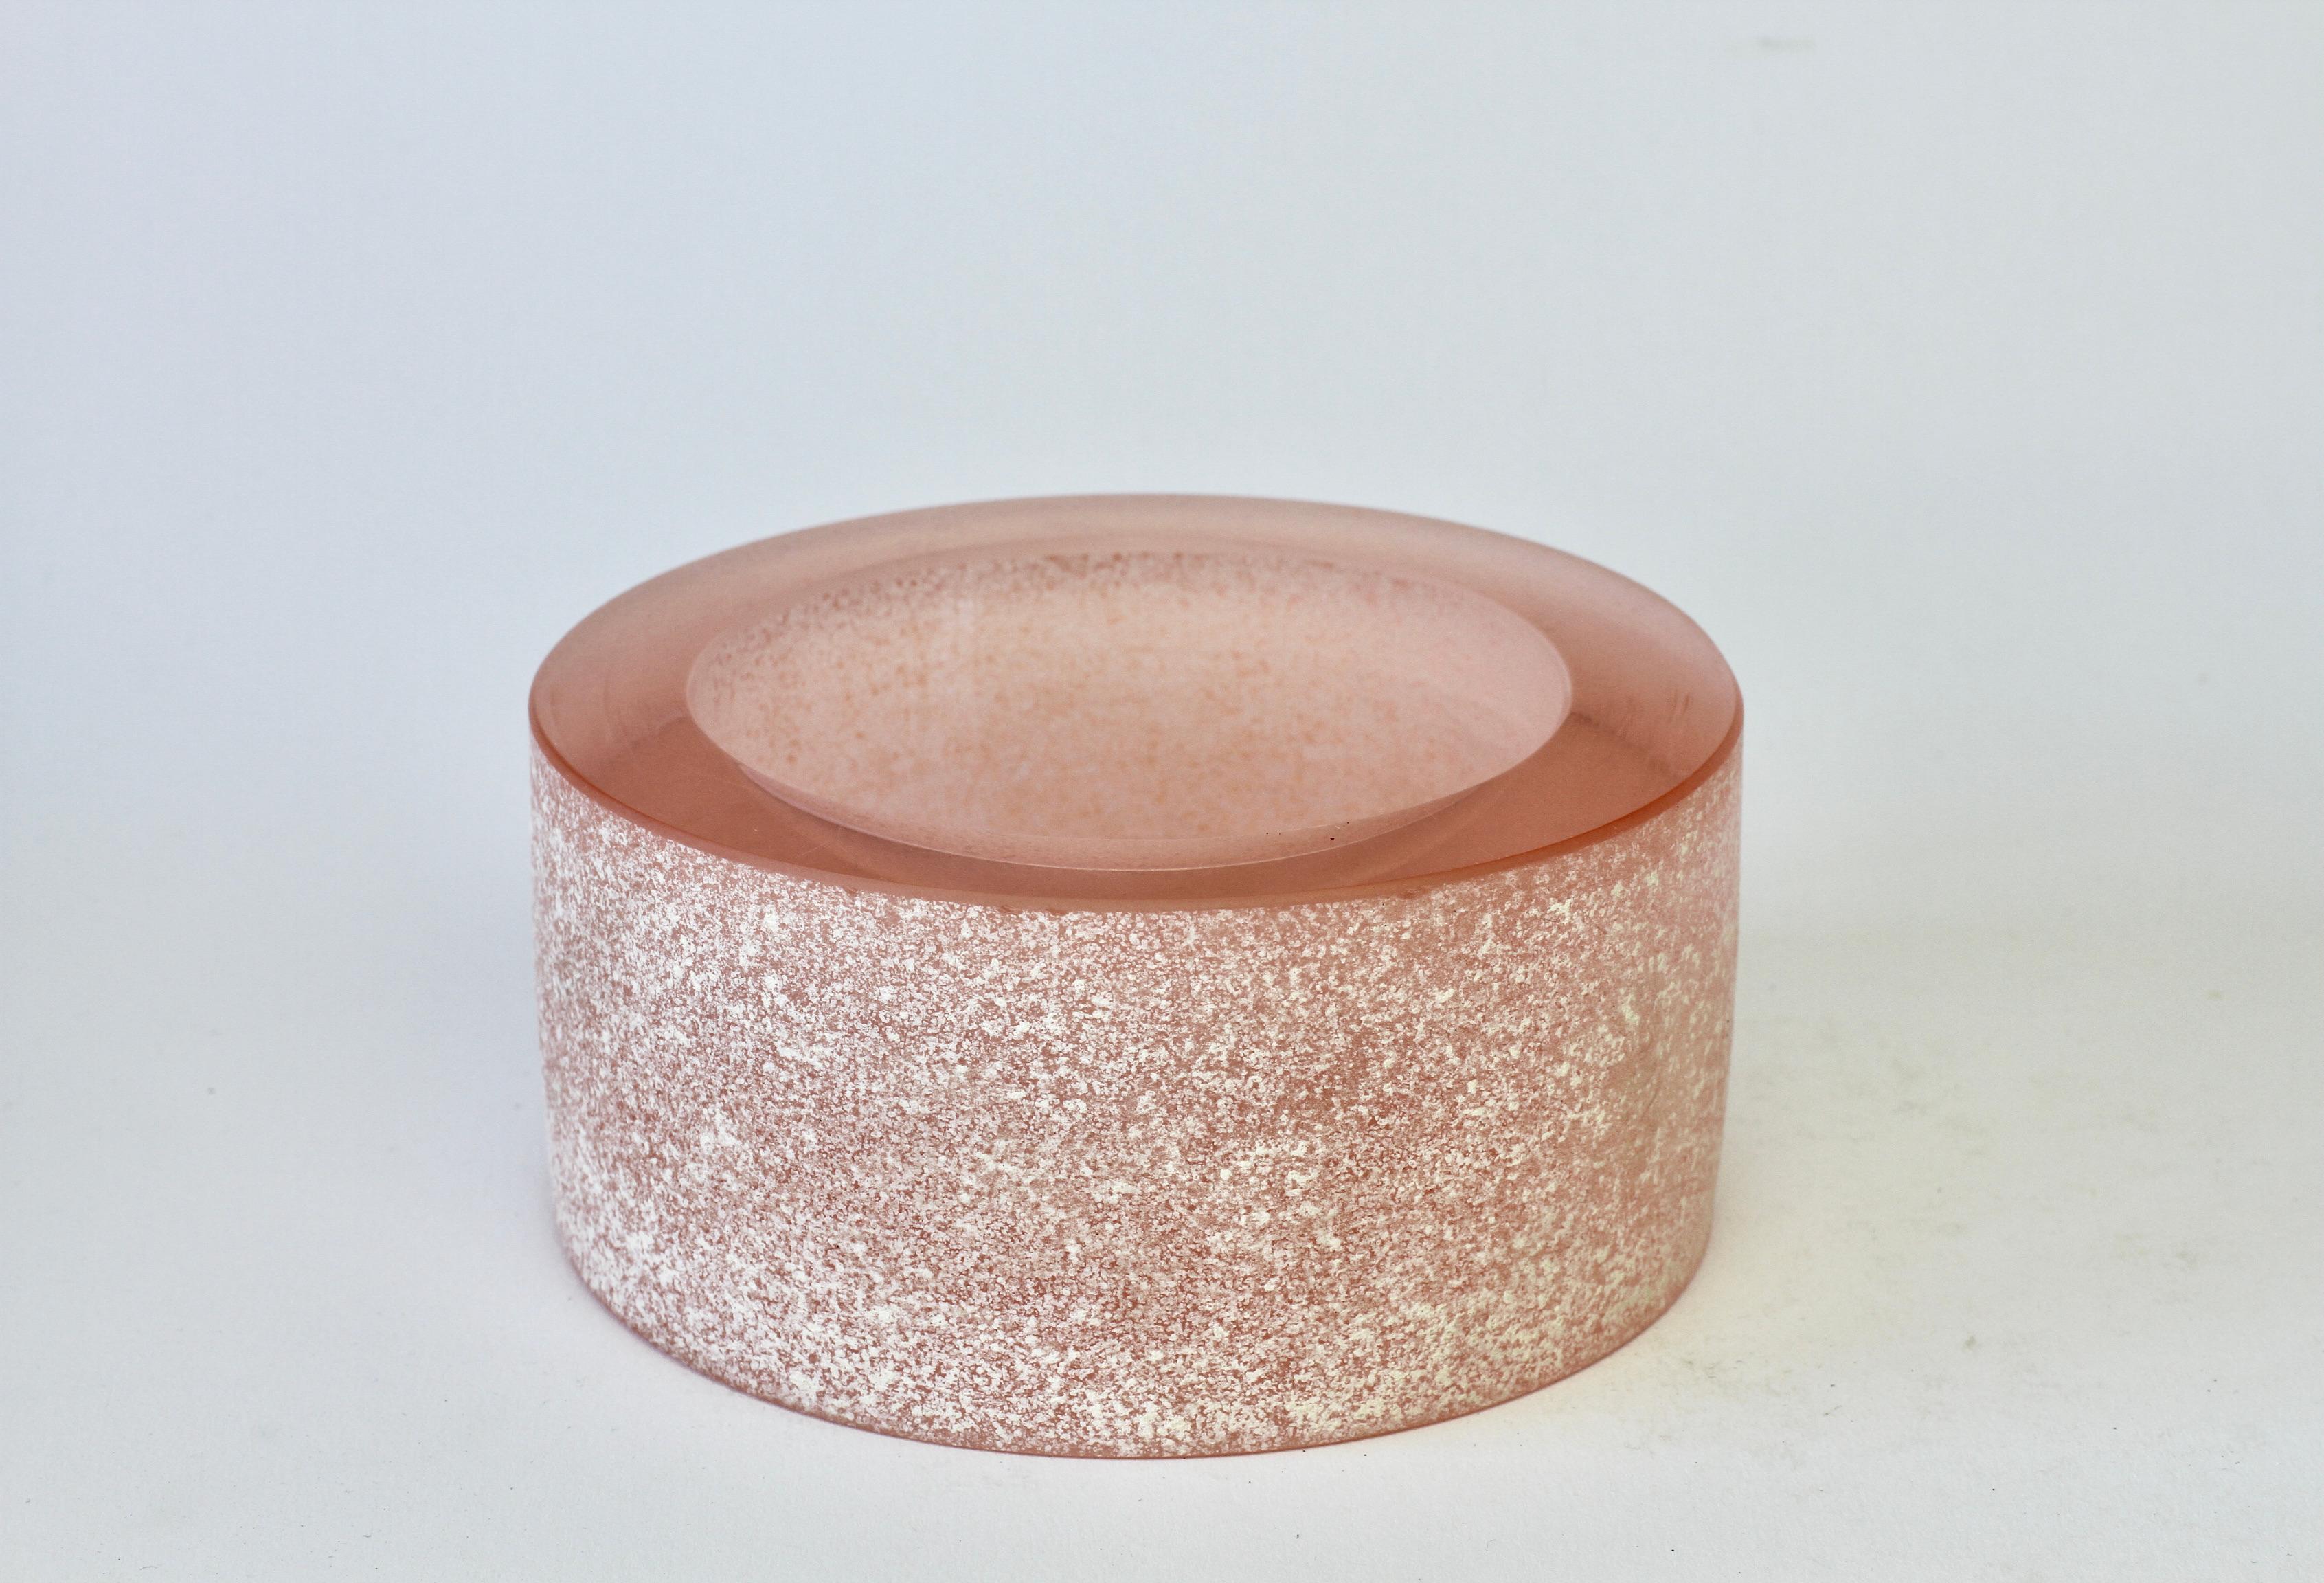 Mid-Century Modern Seguso Vintage Thick Round Pink 'Scavo' Murano Glass Bowl or Ashtray circa 1980s For Sale